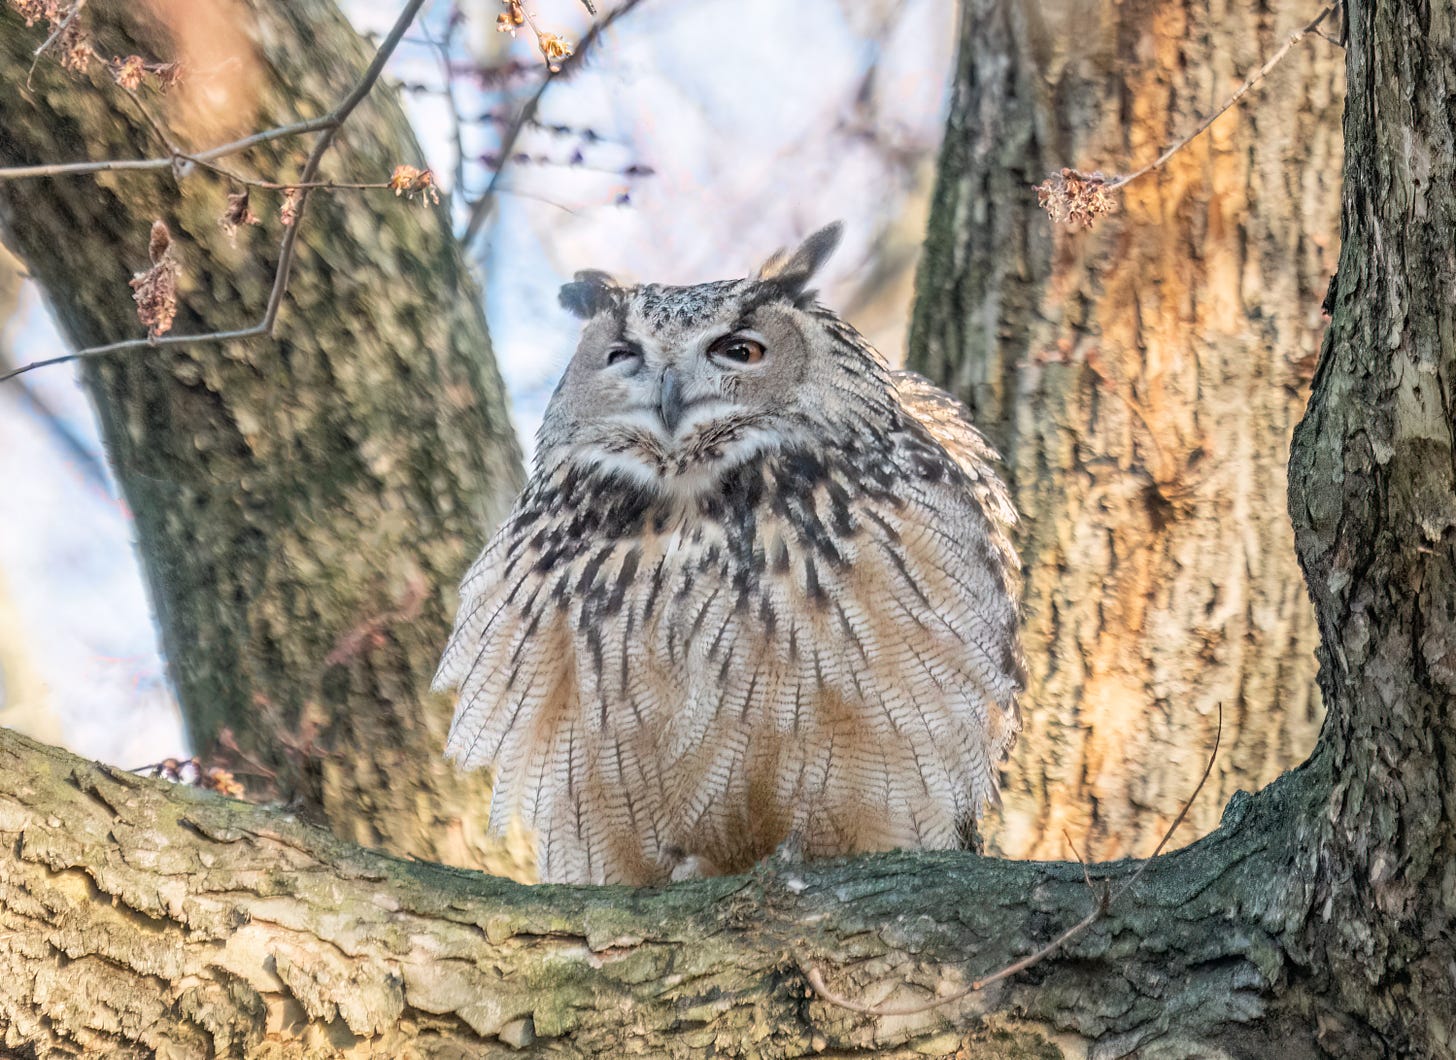 a eurasian eagle owl fluffed up on a branch, its eyes squinted.